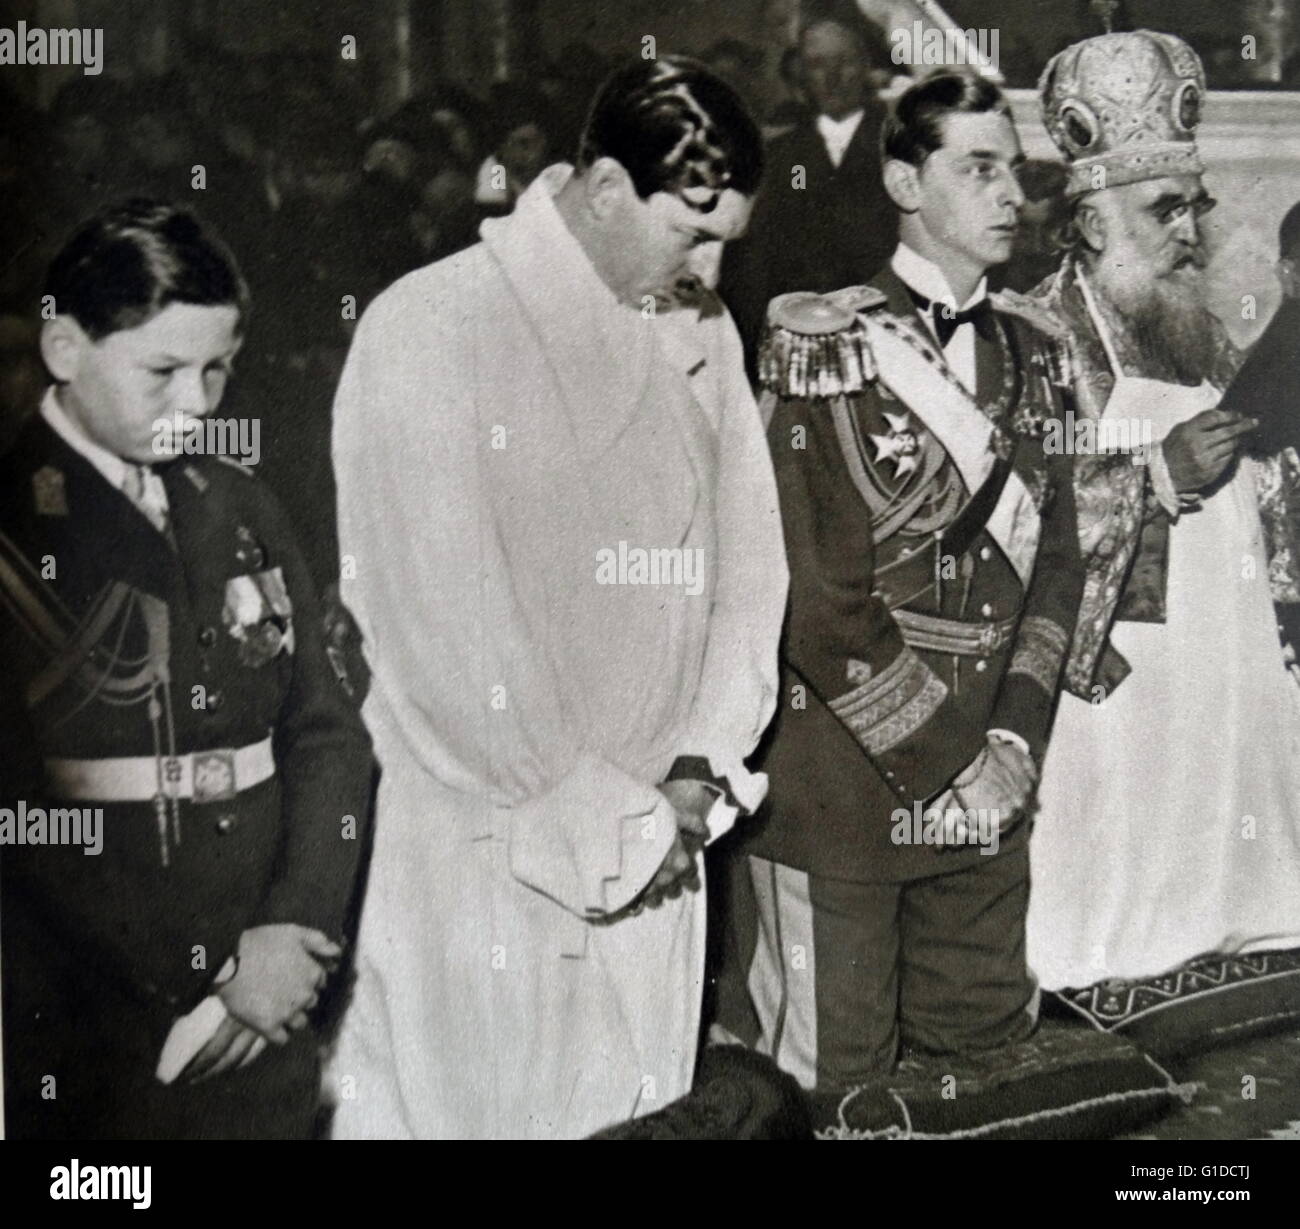 Photographic print of Crown Prince Michael and his Father King Carol of Romania during a mass in Bucharest. Dated 20th Century Stock Photo